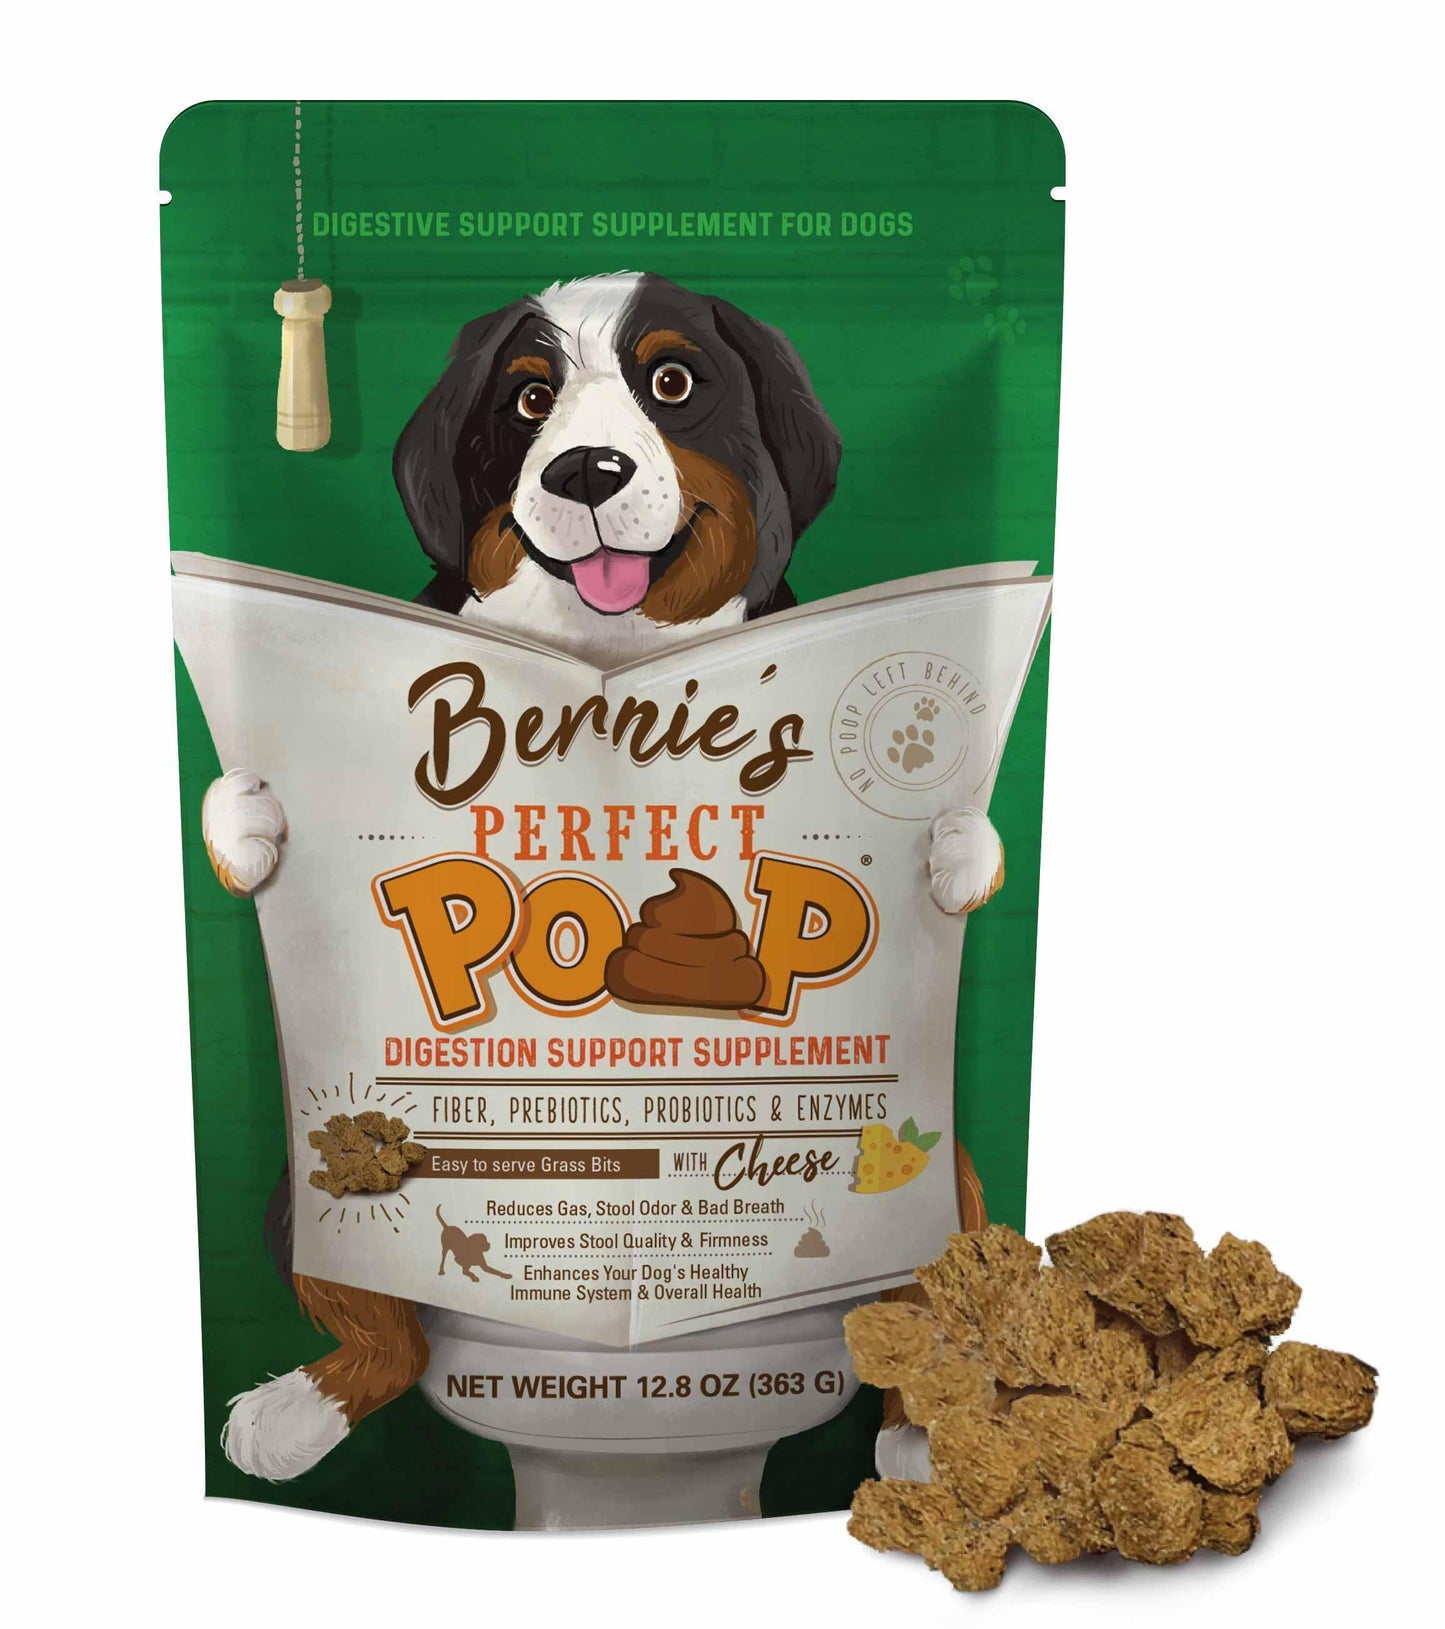 Bernie's perfect poop digestion support supplement bag